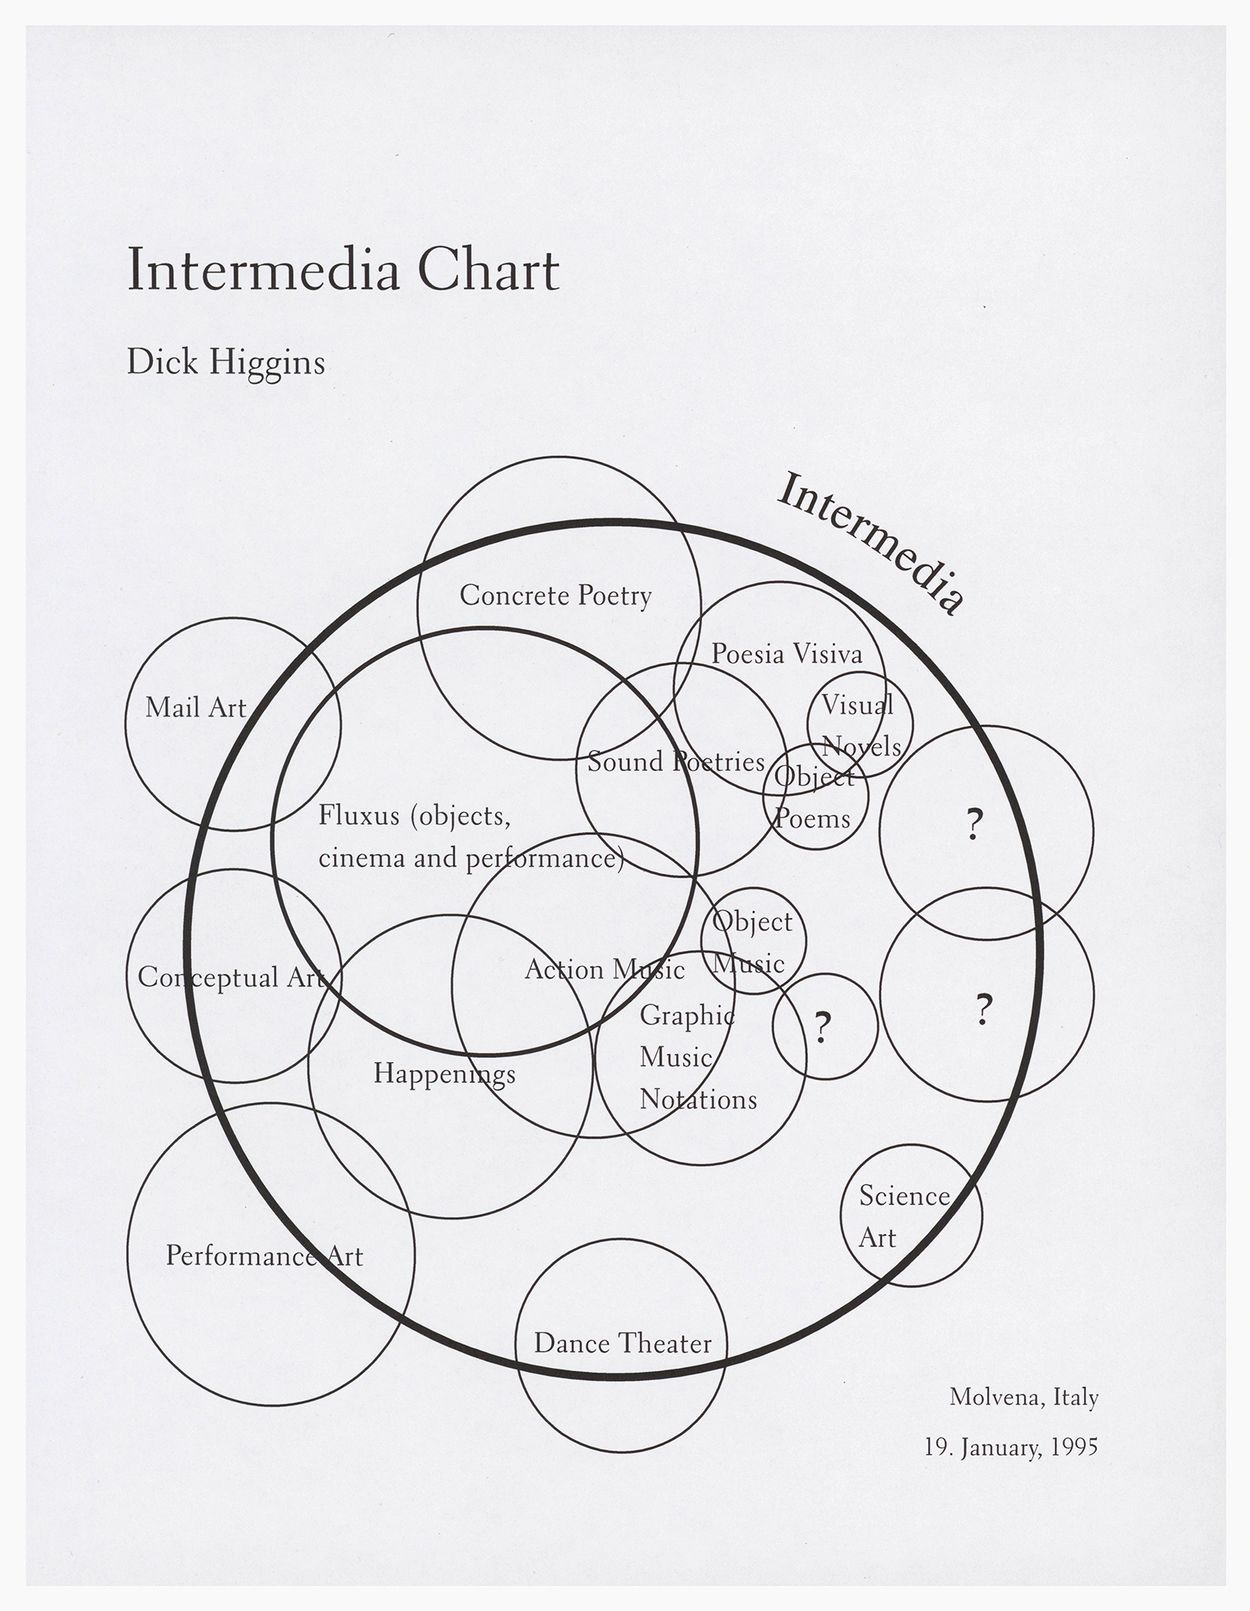 Dick Higgins, Intermedia Chart, 1995, offset lithograph on paper.